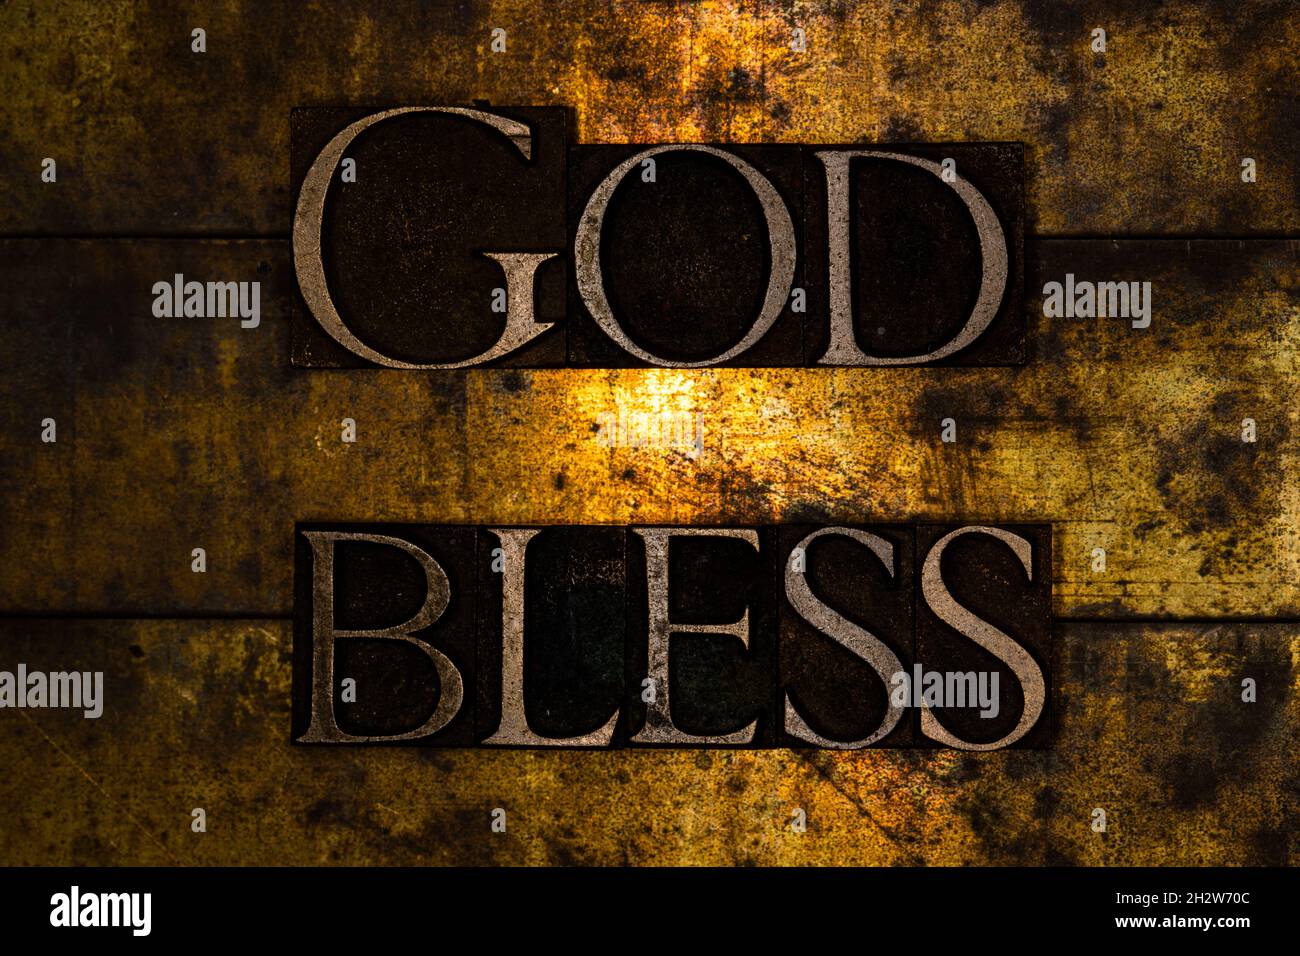 God Bless text on textured grunge copper and vintage gold background Stock Photo